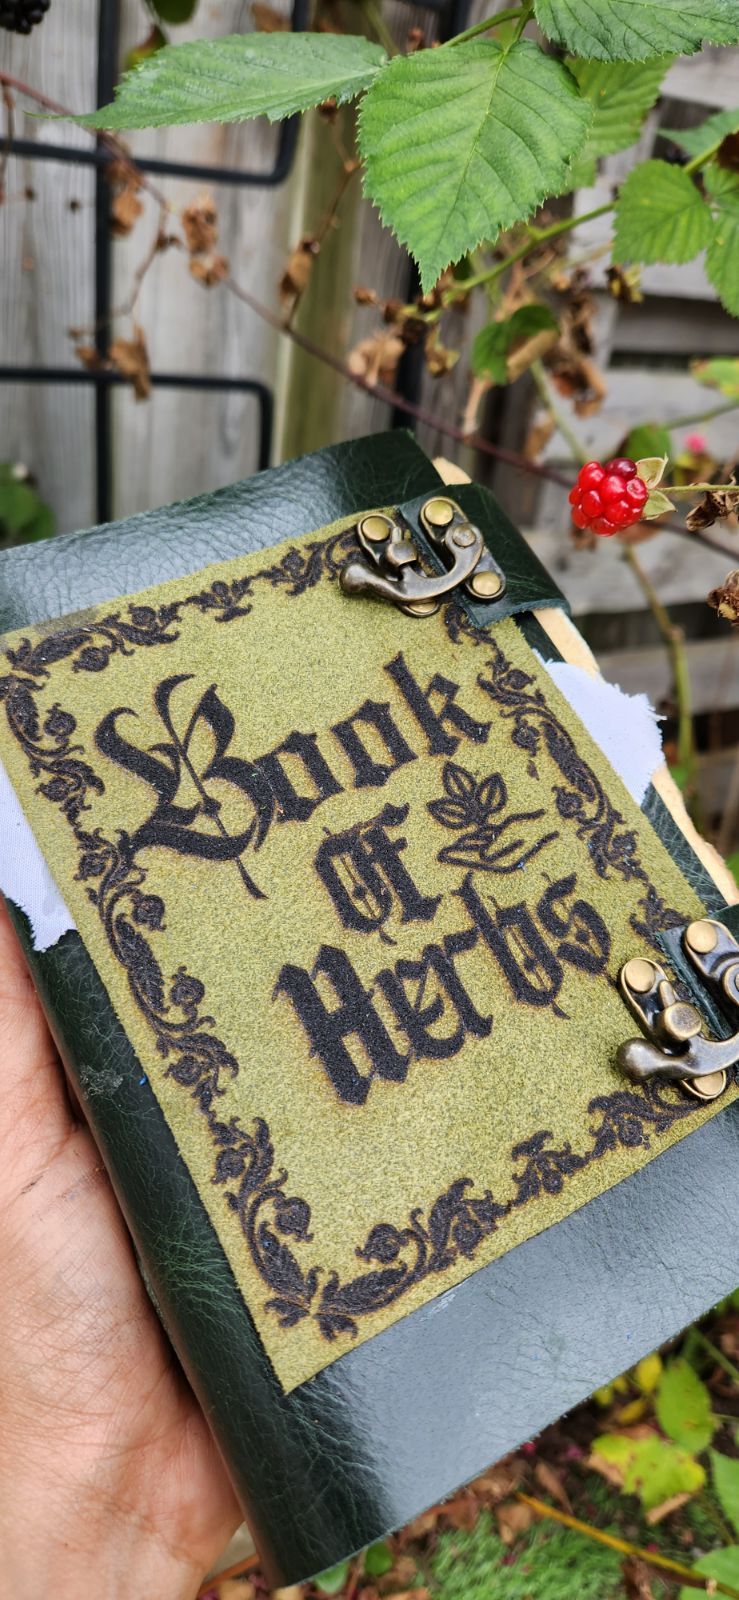 Book of Herbs